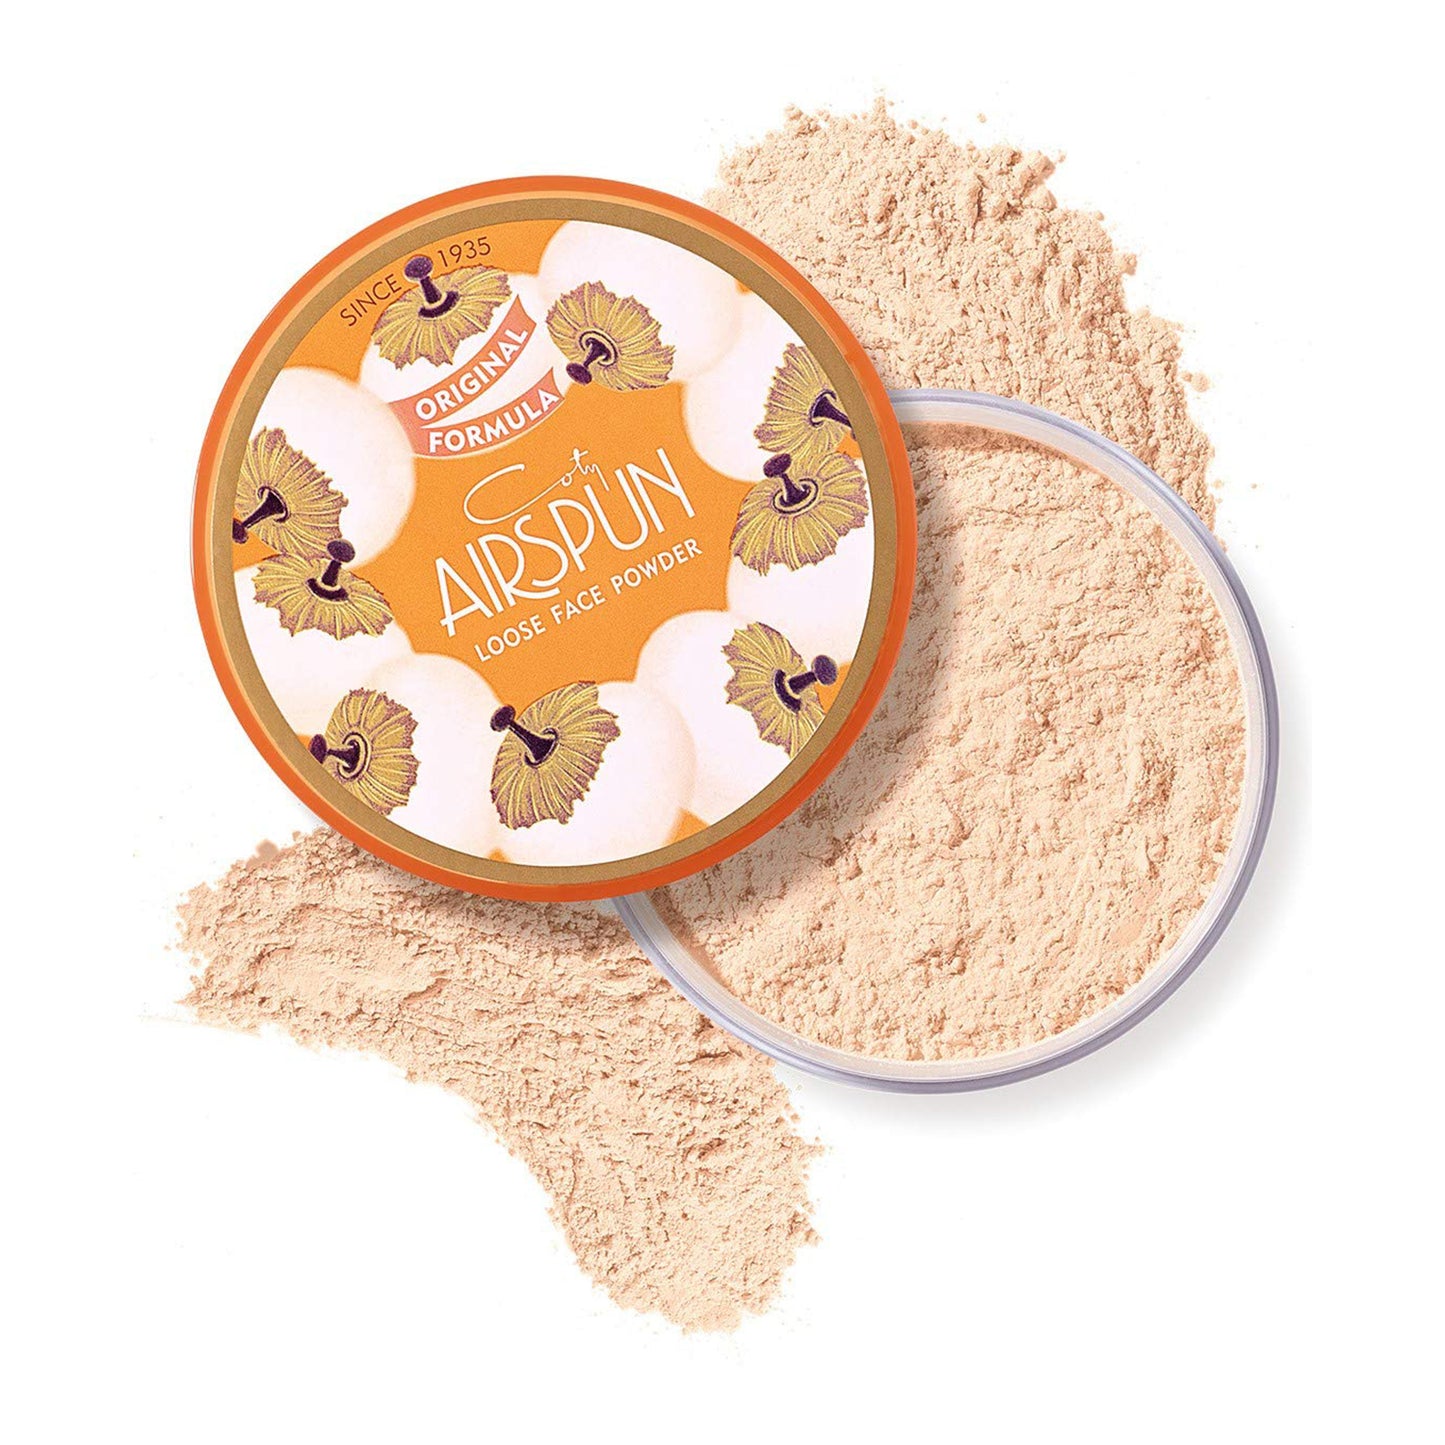 Coty Airspun Loose Face Powder. cash on delivery in karachi, lahore, pakistan